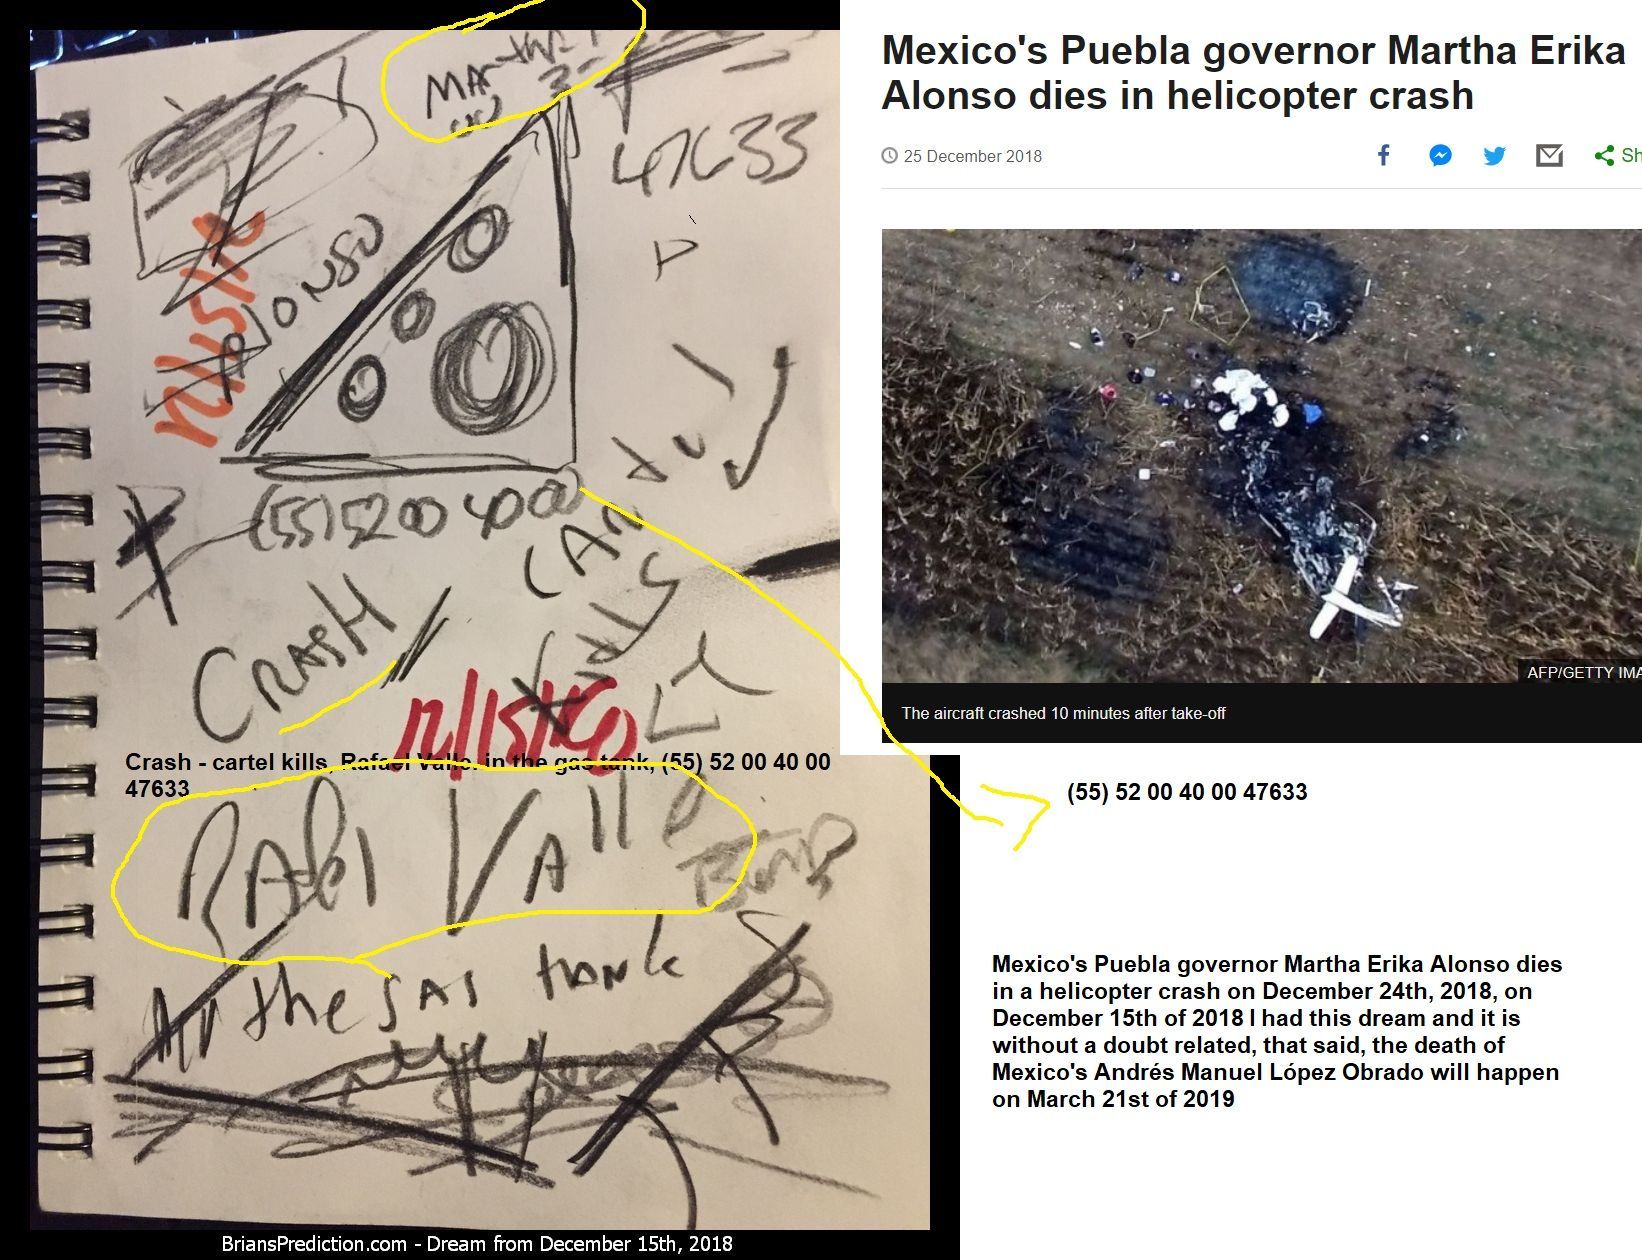 Governor Martha Erika Alonso Dies In Helicopter Crash 11471 16 December 2018 4 - Mexico'S Puebla Governor Martha Er...
Mexico'S Puebla Governor Martha Erika Alonso Dies In A Helicopter Crash On December 24th, 2018, On December 15th Of 2018 I Had This Dream And It Is Without A Doubt Related, That Said, The Death Of Mexico'S Andrã©S Manuel Lã³Pez Obrador Will Happen On March 21st Of 2019  A Mexican Governor Who Was Sworn In Earlier This Month And Her Senator Husband Have Died In A Helicopter Crash In The Central State Of Puebla.  The Aircraft Carrying Puebla Gov Martha Erika Alonso And Sen Rafael Moreno Valle Came Down Shortly After It Took Off.  The Two Pilots Were Killed. Reports Say A Third Passenger Also Died.  Officials Say The Helicopter May Have Suffered An Unspecified Failure. An Investigation Has Been Opened.  Ms Alonso, 45, Had Been Sworn In On 14 December As Puebla'S First Female Governor, After Hotly Contested Polls.  Mr Moreno, 50, Had Served As Puebla'S Governor Between 2011 And 2017.  What Do We Know About The Crash?  The Privately-Owned Agusta Helicopter Bound To Mexico City Lost Contact With Air Traffic Control And Crashed 10 Minutes After Take-Off, Security Minister Alfonso Durazo Said.  The Accident Happened On Monday At 14:50 Local Time (20:50 Gmt) In The Area Of Santa Marã­a Coronango, Near The State Capital Of Puebla, Mexico'S Second-Largest City.  Mexico Country Profile  Image Copyrightreuters  Image  Officials Say They Believe The Helicopter May Have Suffered An Unspecified Failure  "At This Point, There'S No Evidence That Could Lead Us To Conclude That The Cause Was Not Related To How The [helicopter] Was Functioning,&Quot; Mr Durazo Told Journalists.  President Andrã©S Manuel Lã³Pez Obrador Said An Investigation Would Be Launched To Establish "the Truth&Quot; About What Caused The Crash.  In A Tweet (in Spanish), He Expressed "deepest Condolences&Quot; To The Relatives Of The Two Politicians.  Skip Twitter Post By @lopezobrador_  Andrã©S Manuel  Âœ”  @lopezobrador_  En Lo Personal, Mi Mã¡S Profundo Pã©Same A Los Familiares Del Senador Rafael Moreno Valle Y De Su Esposa, La Gobernadora De Puebla Martha Ã‰Rika Alonso. Como Autoridad, Asumo El Compromiso De Investigar Las Causas; Decir La Verdad Sobre Lo Sucedido Y Actuar En Consecuencia  57.7k  6:42 Pm - Dec 24, 2018  Twitter Ads Info And Privacy  24.5k People Are Talking About This  Twitter Ads Info And Privacy  Report  End Of Twitter Post By @lopezobrador_  The Accident Comes After A Number Of High-Profile Deaths In Helicopter Crashes Over The Years In Mexico, Including Interior Minister Francisco Blake Mora In 2011, The Bbc'S Will Grant Reports.  Earlier This Year, 13 People Died When A Minister'S Helicopter Crashed Into A Crowd, Although The Minister Himself Survived, Our Correspondent Says.  Who Are The Victims?  Ms Alonso Was A Member Of The Centre-Right Pan Party. In Elections In July, She Narrowly Beat Manuel Barbosa, President Lã³Pez Obrador'S Favoured Candidate For The Governorship Of One Of Mexico'S Most Populous States.  Puebla'S Parliament Will Now Have To Appoint An Interim Governor Until New Elections Are Held.  Image Copyrightreuters  Image  Martha Erika Alonso Was Sworn In As Puebla'S Governor 10 Days Before The Crash  President Lã³Pez Obrador'S Leftist Morena Party Had Alleged Widespread Irregularities And Fraud In The Poll, And The Final Results Had To Be Validated By An Electoral Tribunal.  Mr Barbosa Said The Deaths Were A "tragedy That No-One Wishes To Anyone&Quot;, Adding: "I Am Shocked And In Mourning. My Sympathies To Their Loved Ones. This Is Not The Time To Make Any Speculation."  Rafael Moreno Valle Was A Member Of The Pan In The Senate. Some Opposition Politicians Called For An Independent Investigation Into The Crash.  The Pilots Have Been Identified As Capt Roberto Cope And First Officer Marco Antonio Tavera.  It Is Presumed That A Fifth Passenger Was On Board, But No Details Have Been Released.
